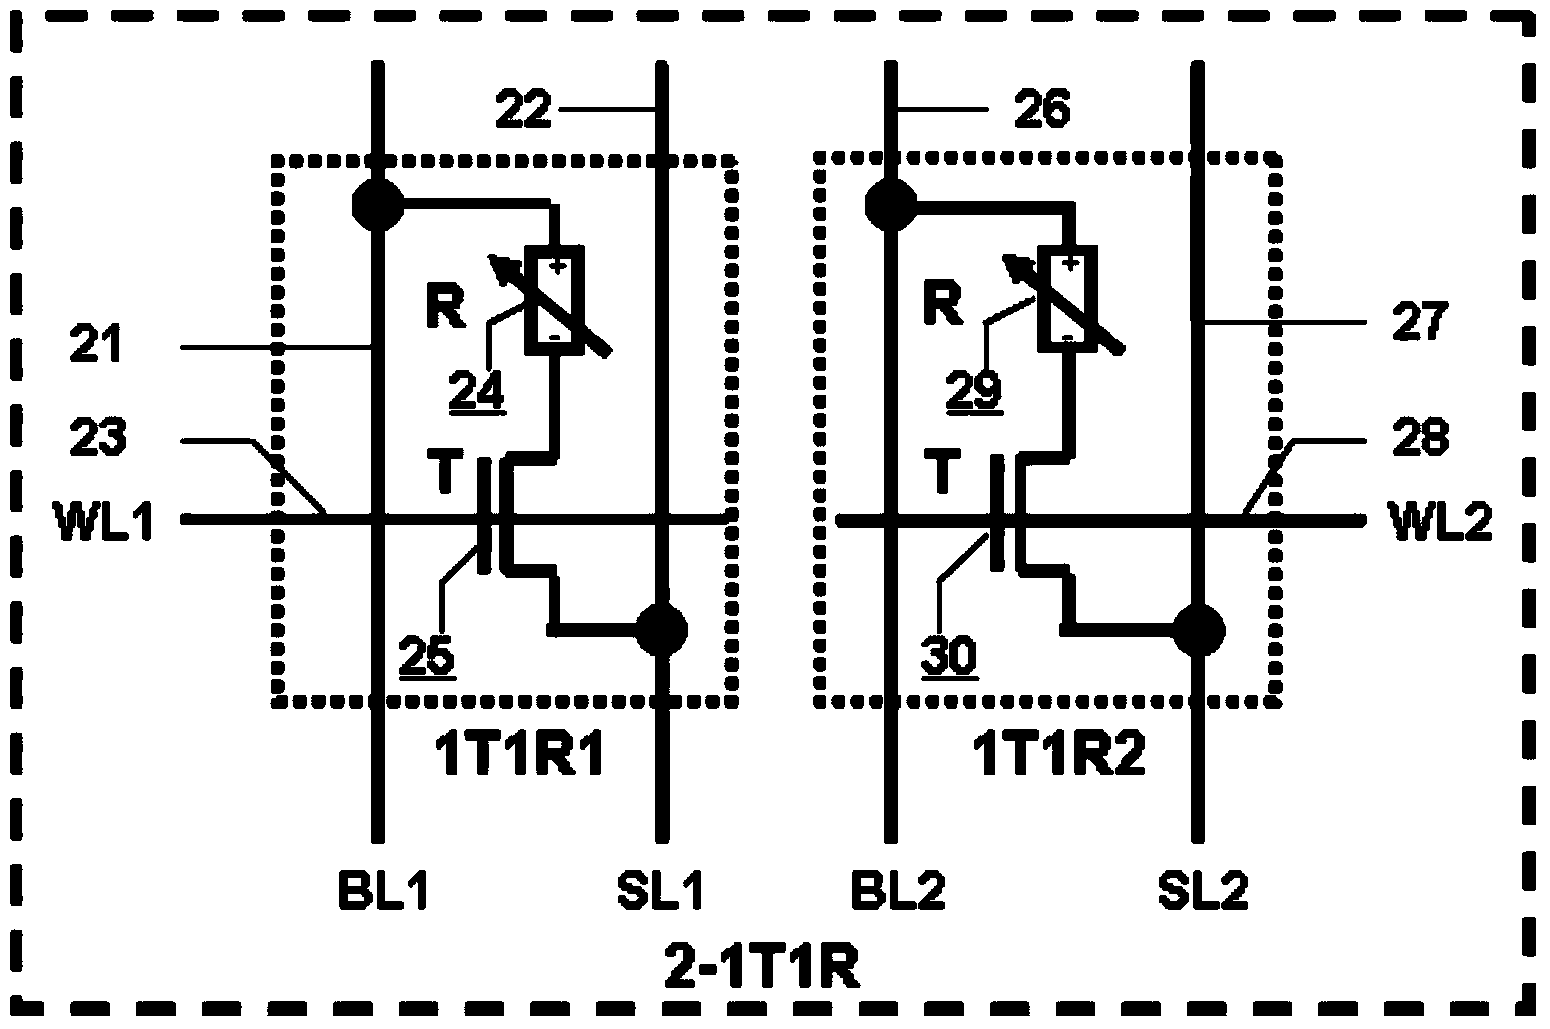 2-1T1R (2-1transistor1resistor) RRAM (resistive random access memory) unit with reading self-reference function